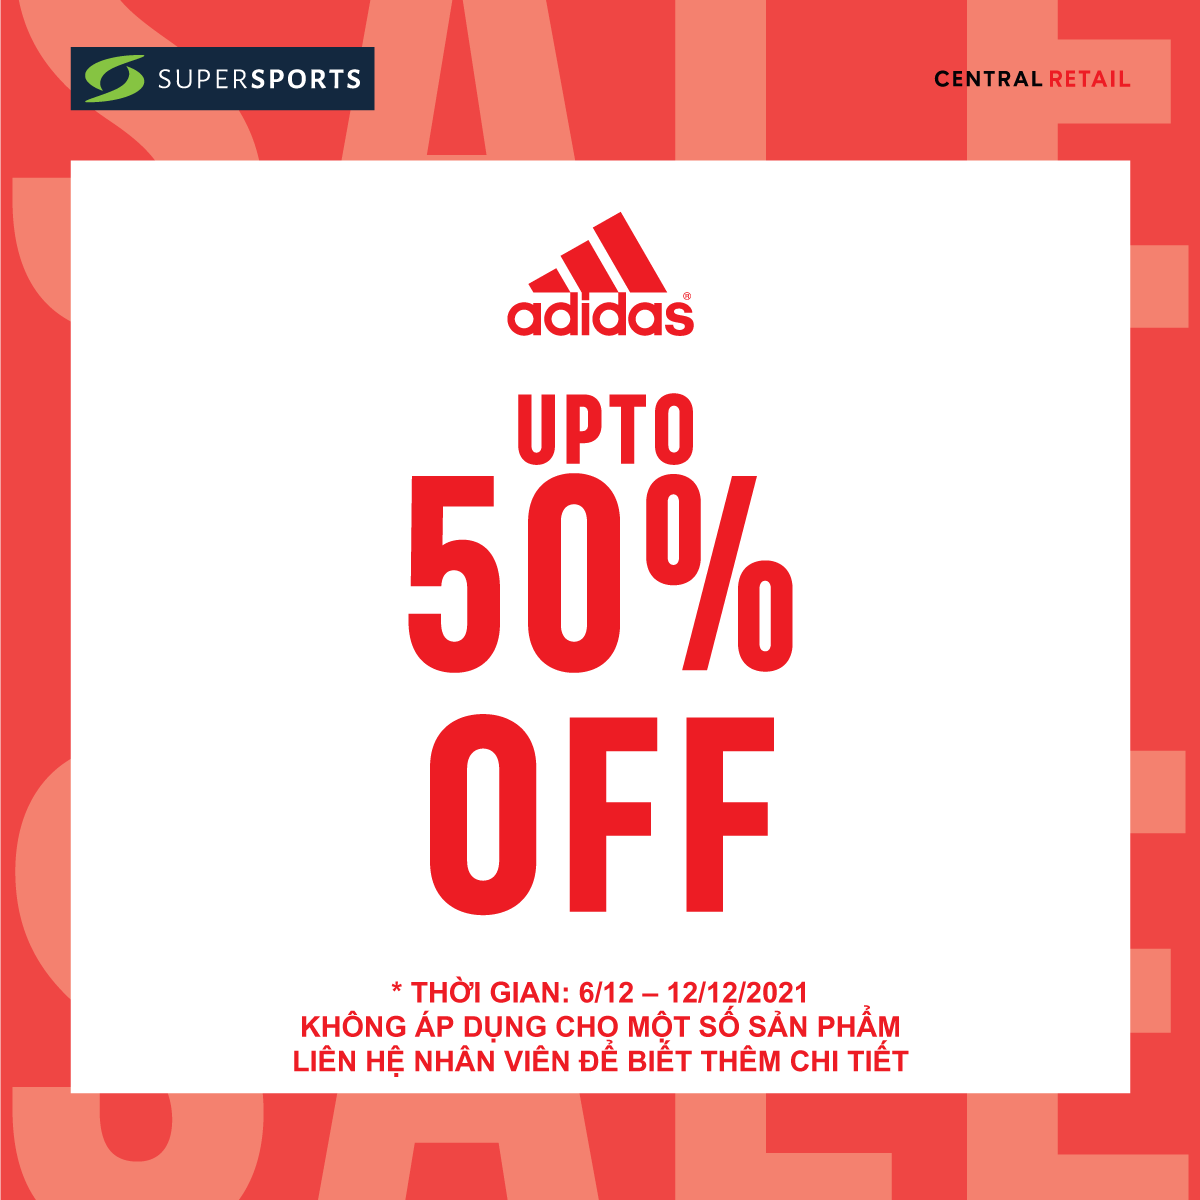 ADIDAS SUPER SALE PARTY AT SUPERSPORTS – SALE UP TO 50%